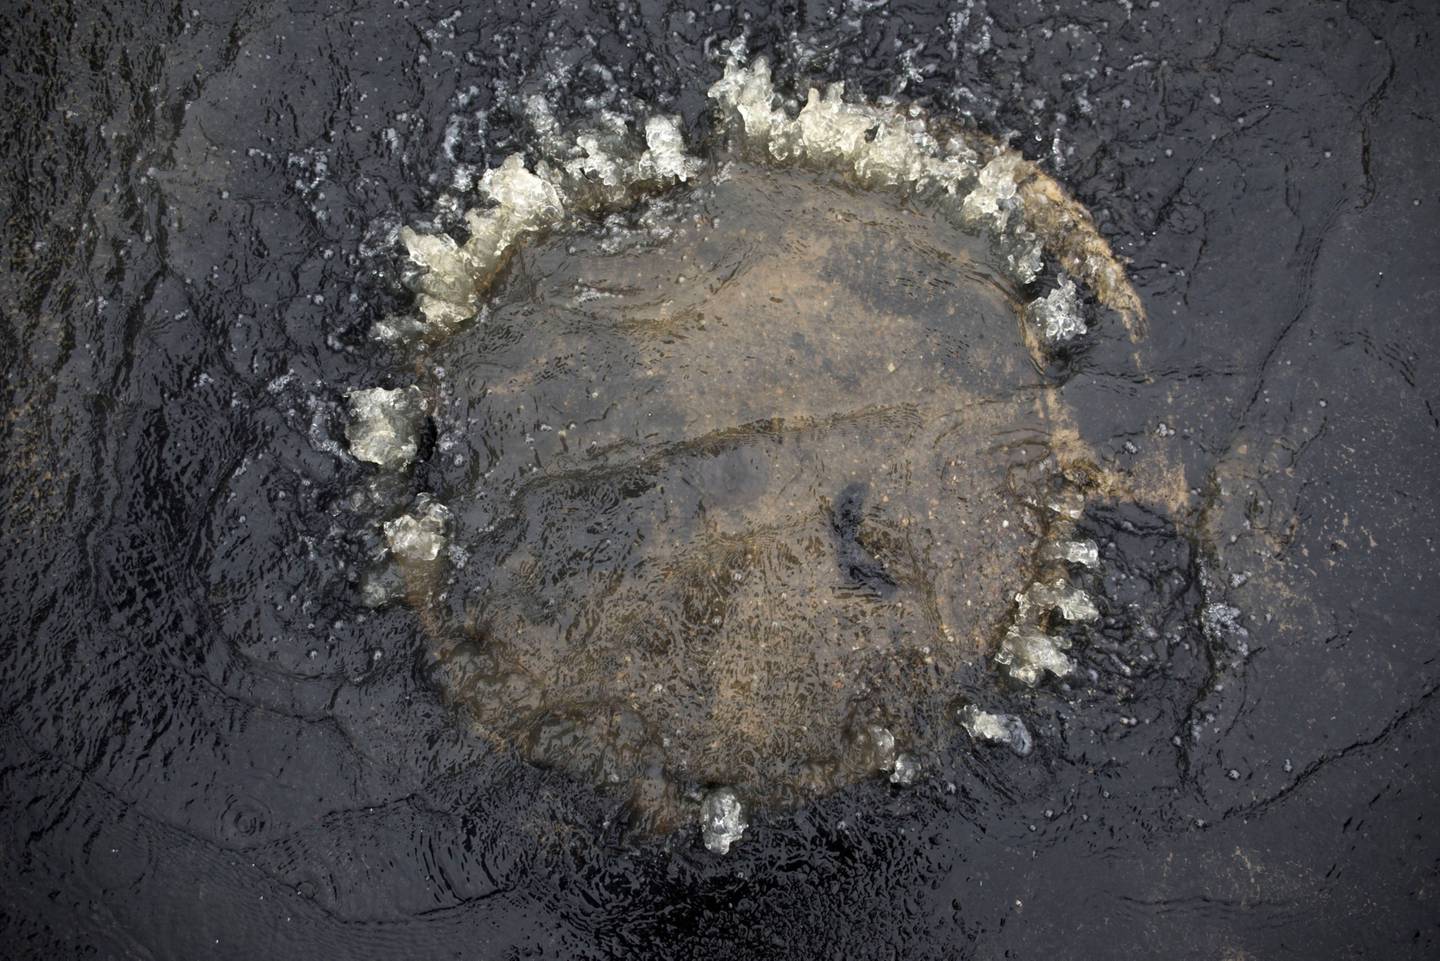 Water seeping from a manhole cover of a flooded drain. Photographer: Brent Lewin/Bloomberg